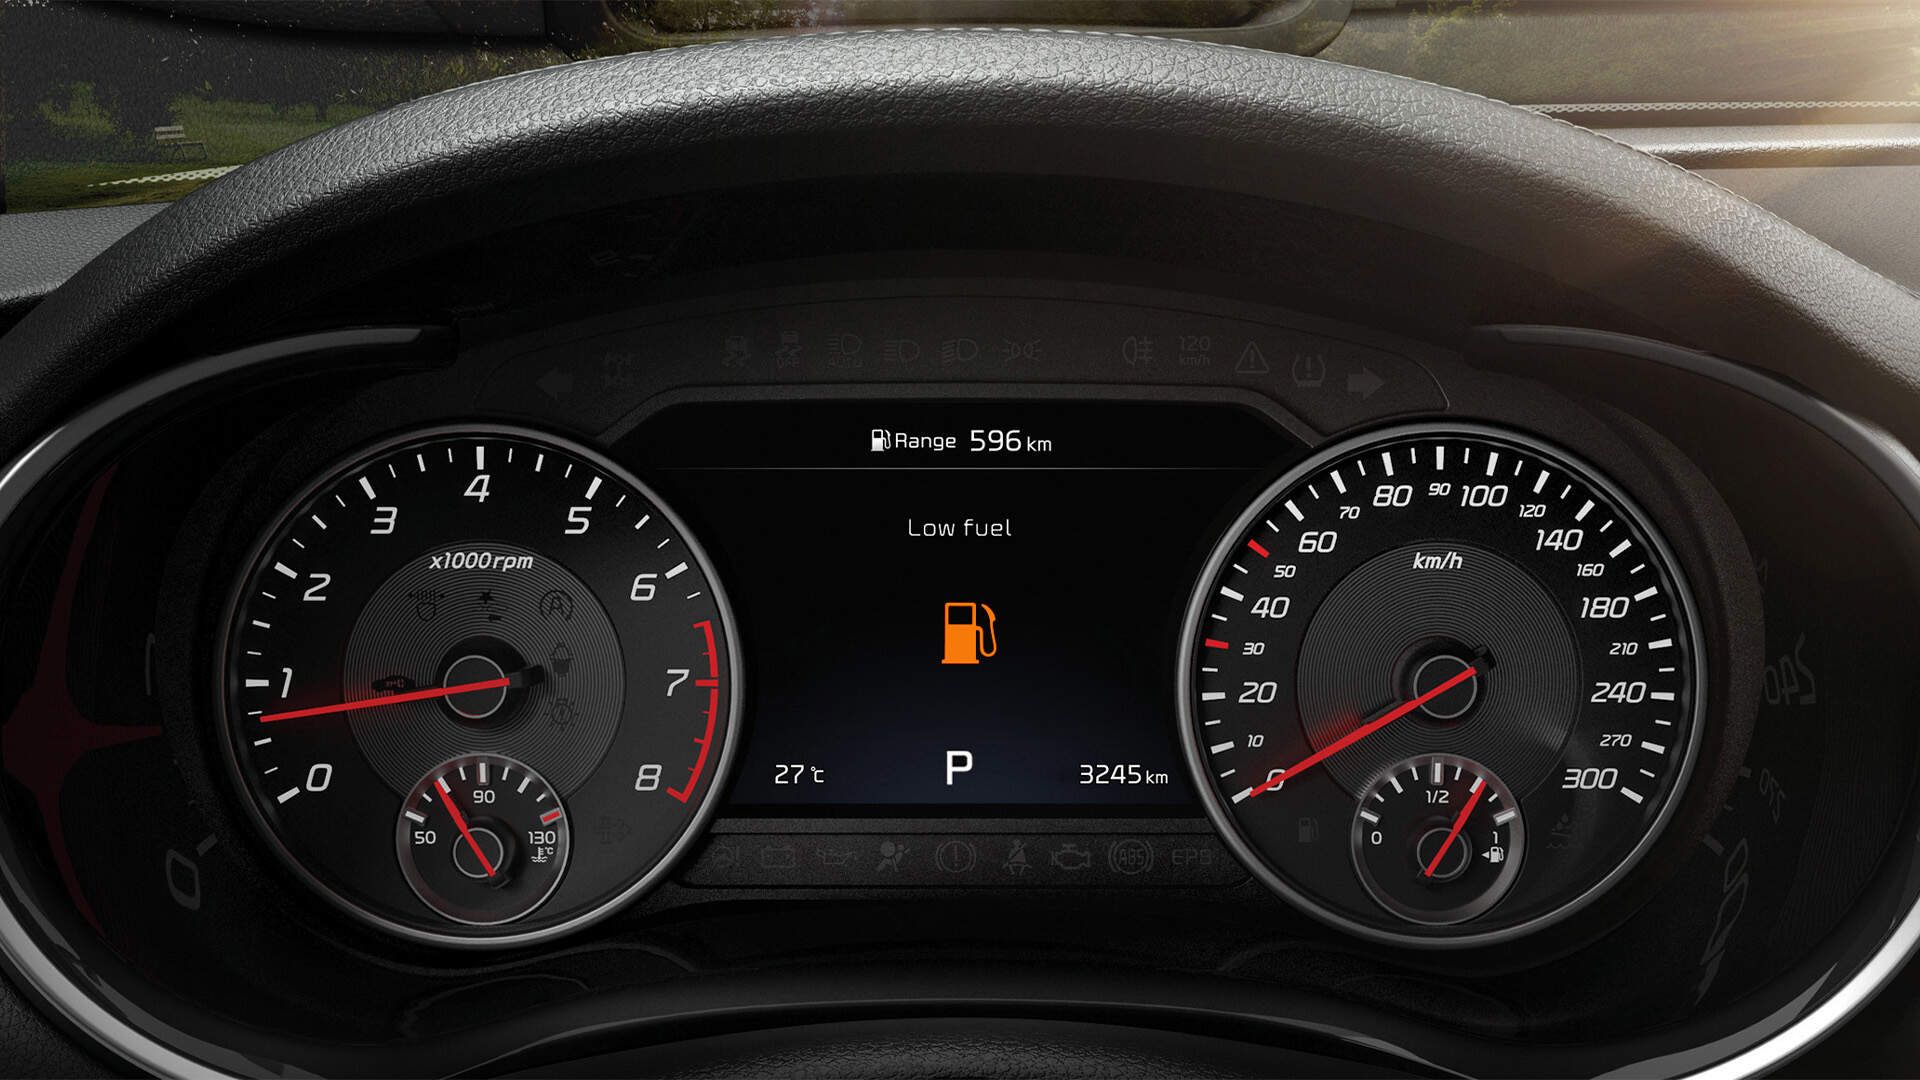 Cluster showing Low Fuel warning light